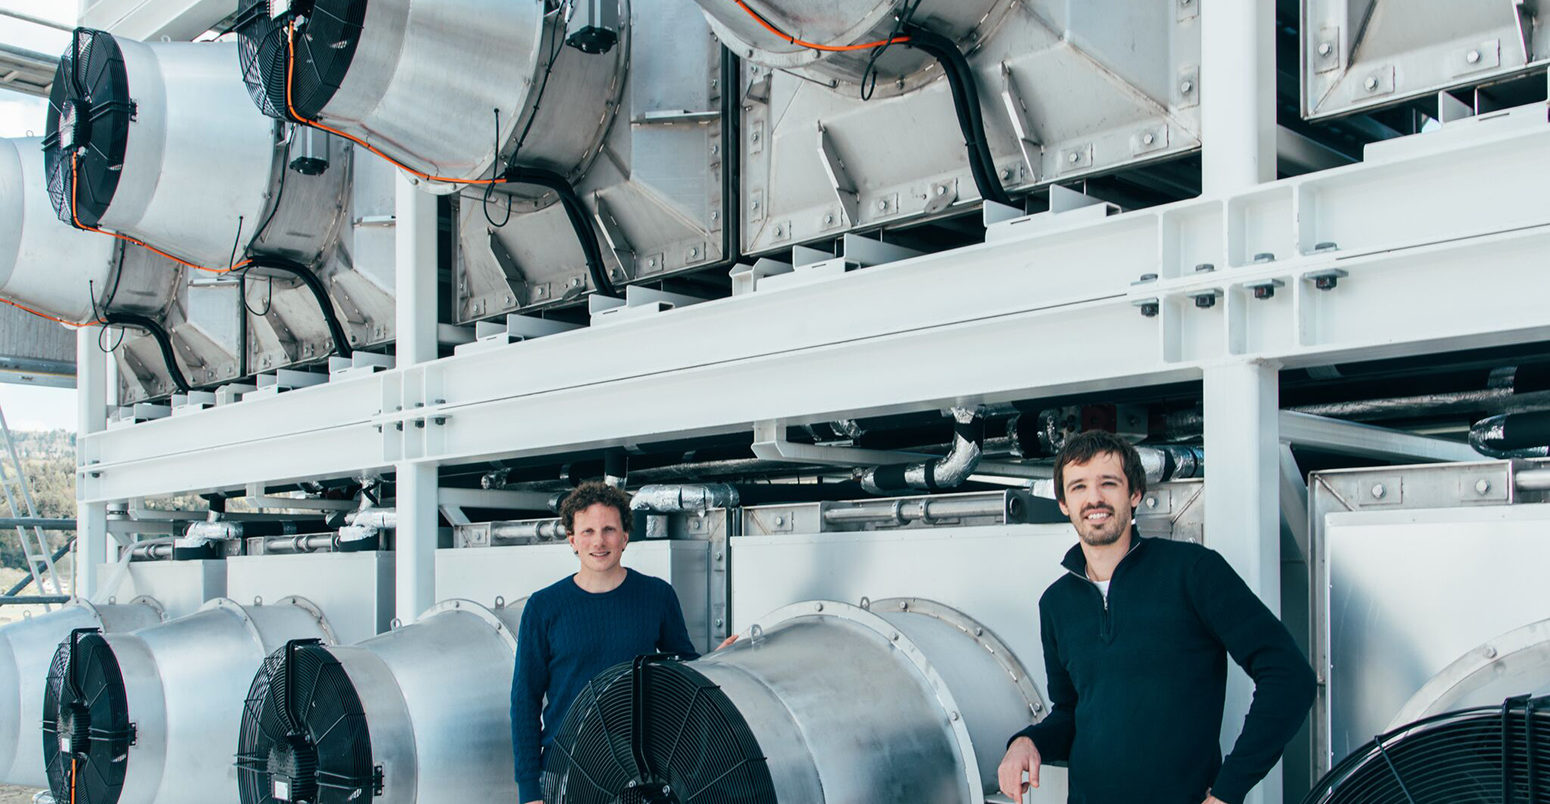 Climeworks direct air capture plant founders Christoph Gebald and Jan Wurzbacher onsite